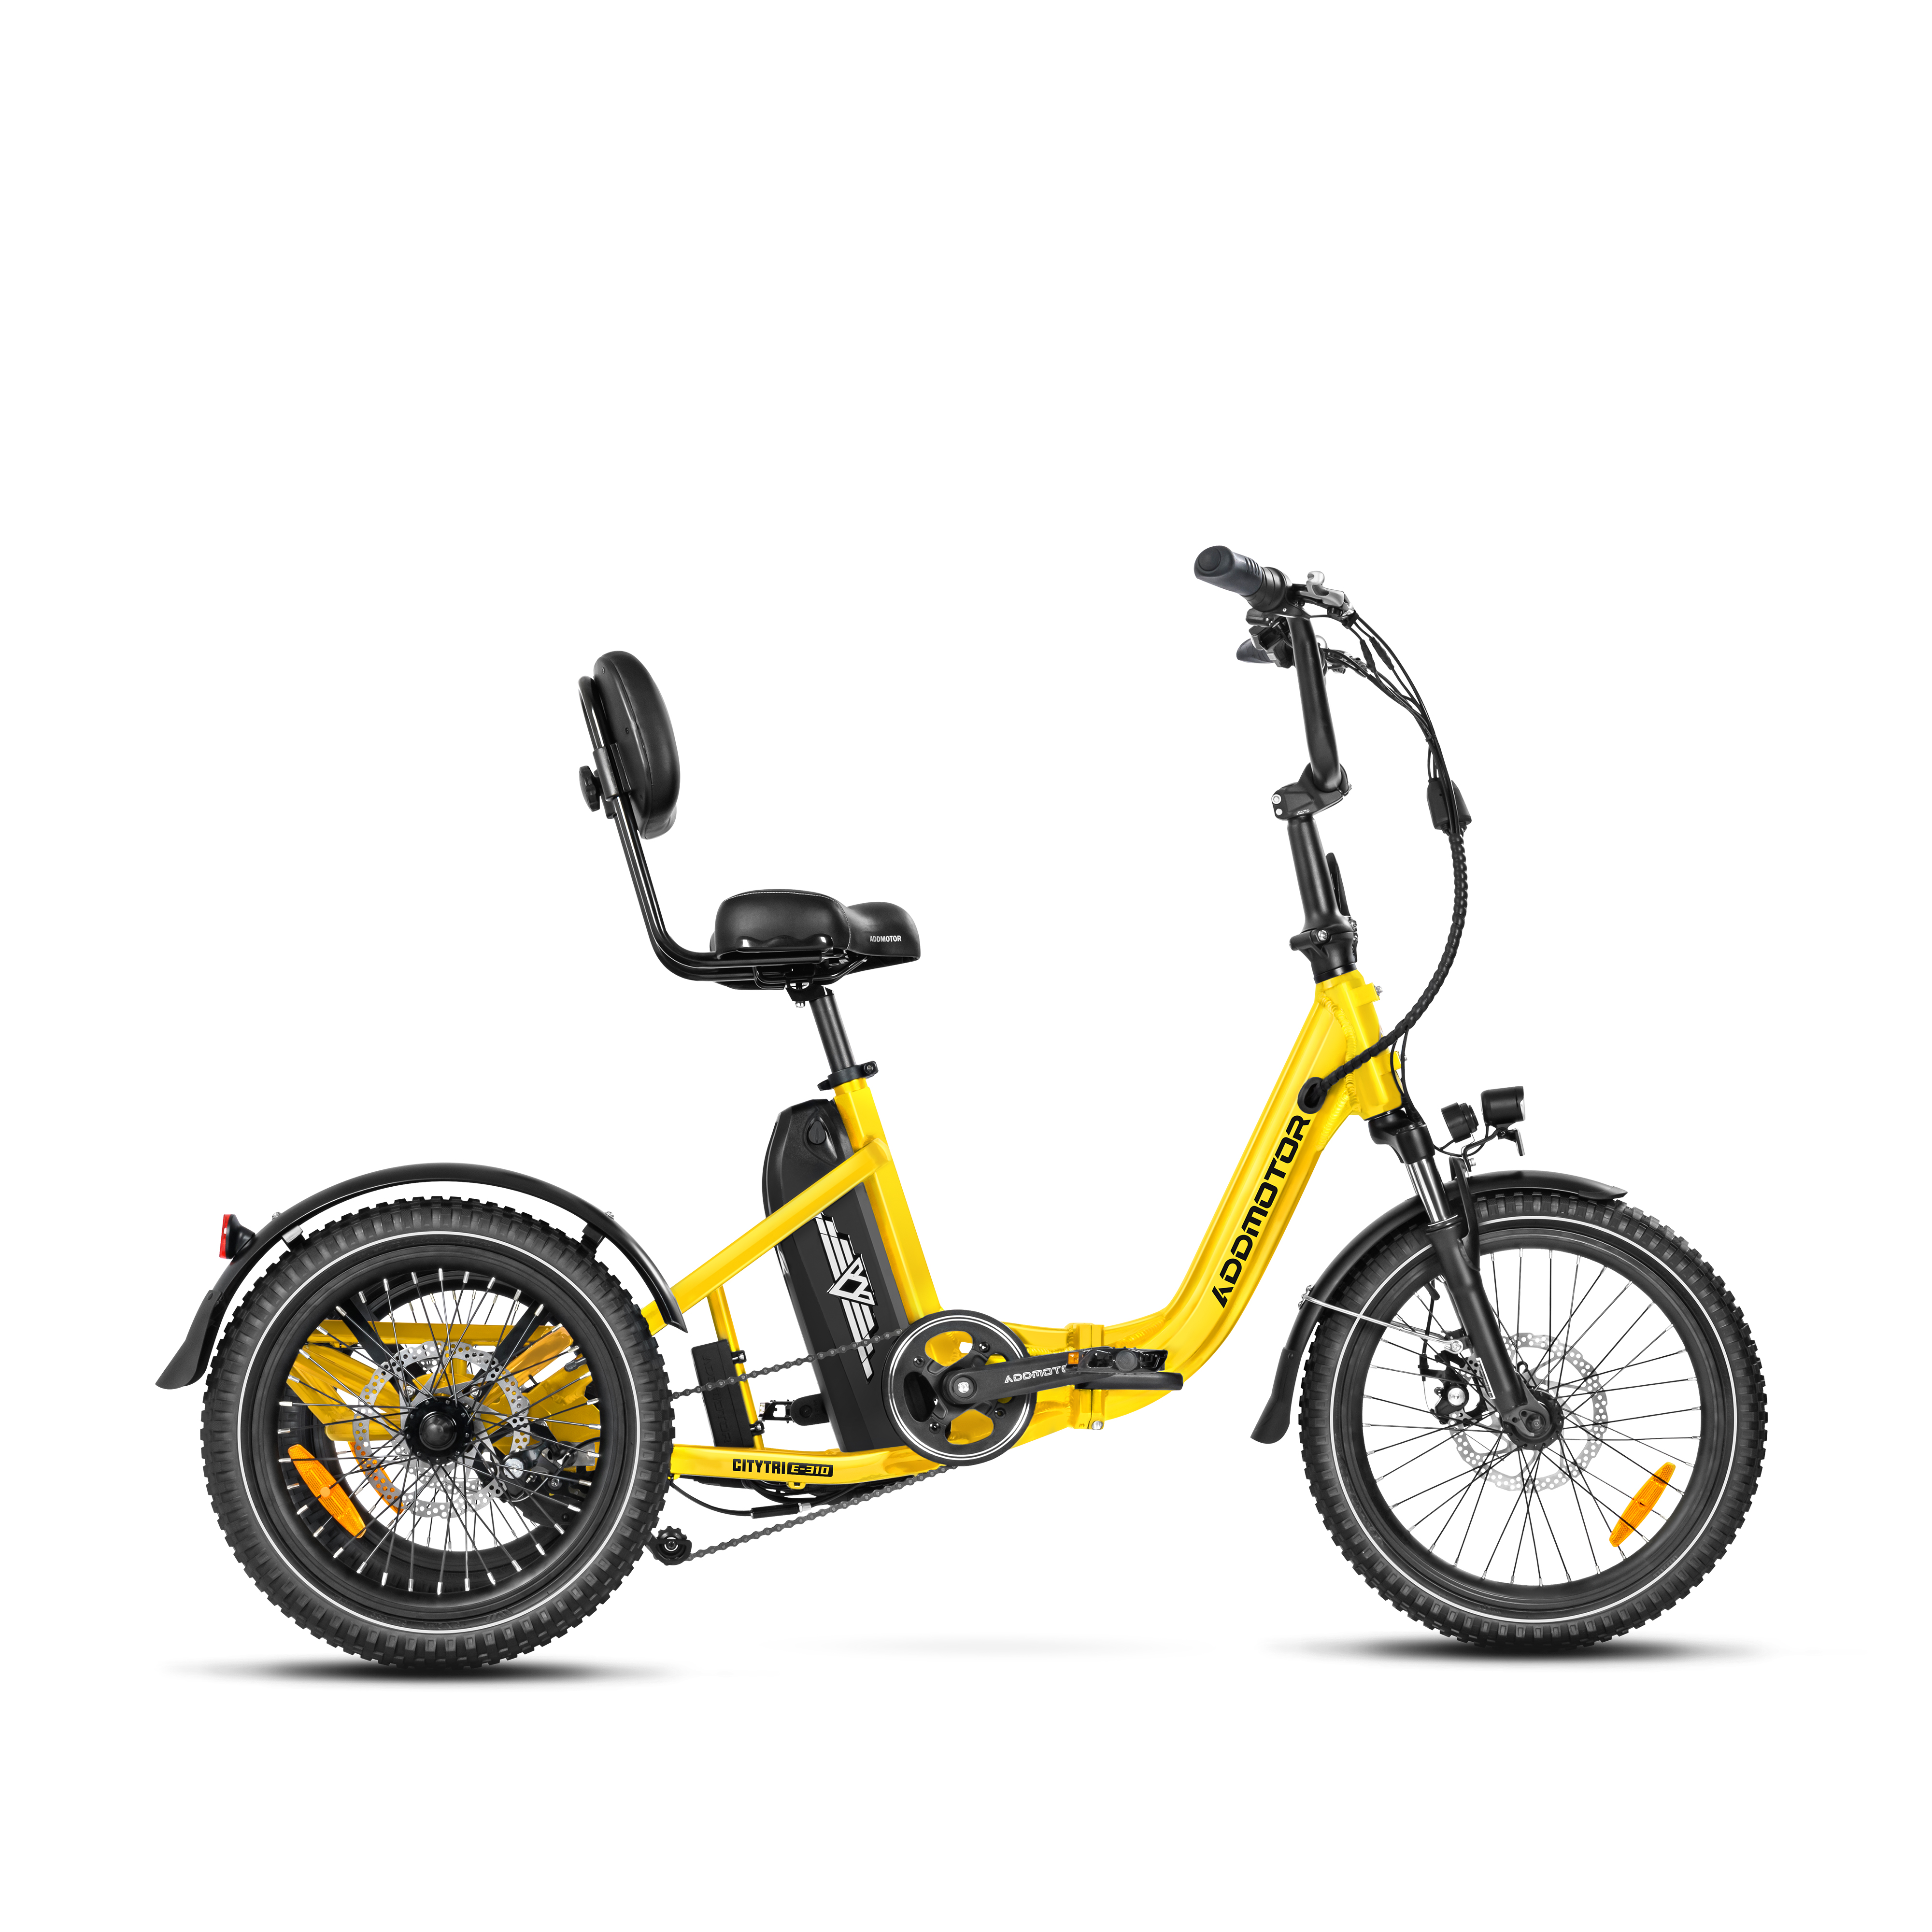 Addmotor Citytri E-310 Electric Trike with 750W 20Ah Best Electric Tricycle Under $2000 Up To 90 Miles - Yellow